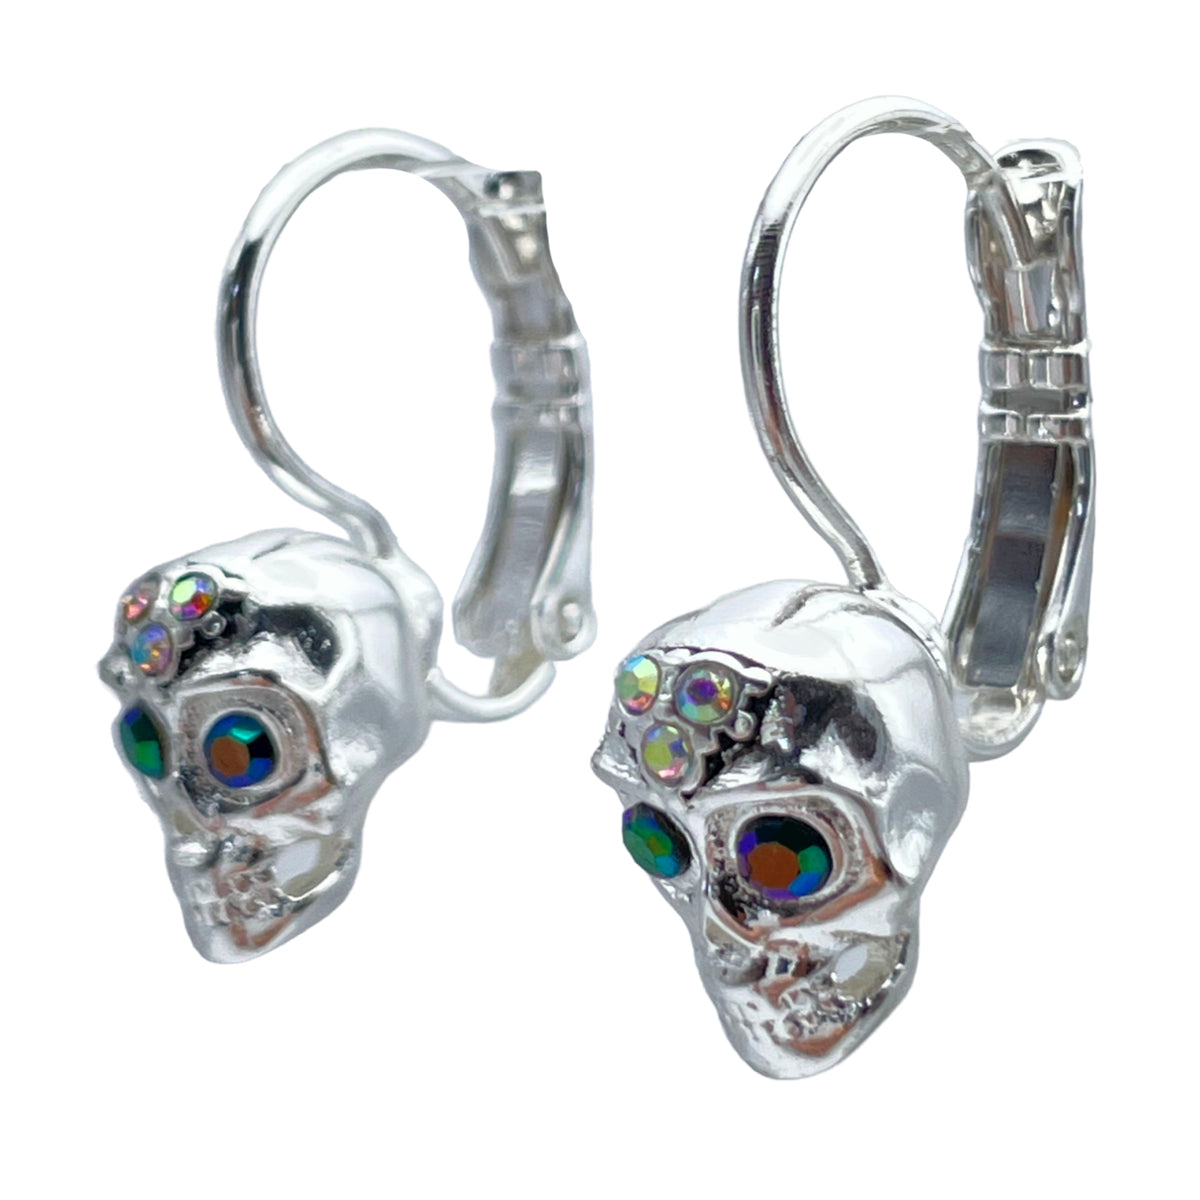 Exquisite Skull Halloween Leverback Earrings Ritzy Couture DeLuxe Silver Plating